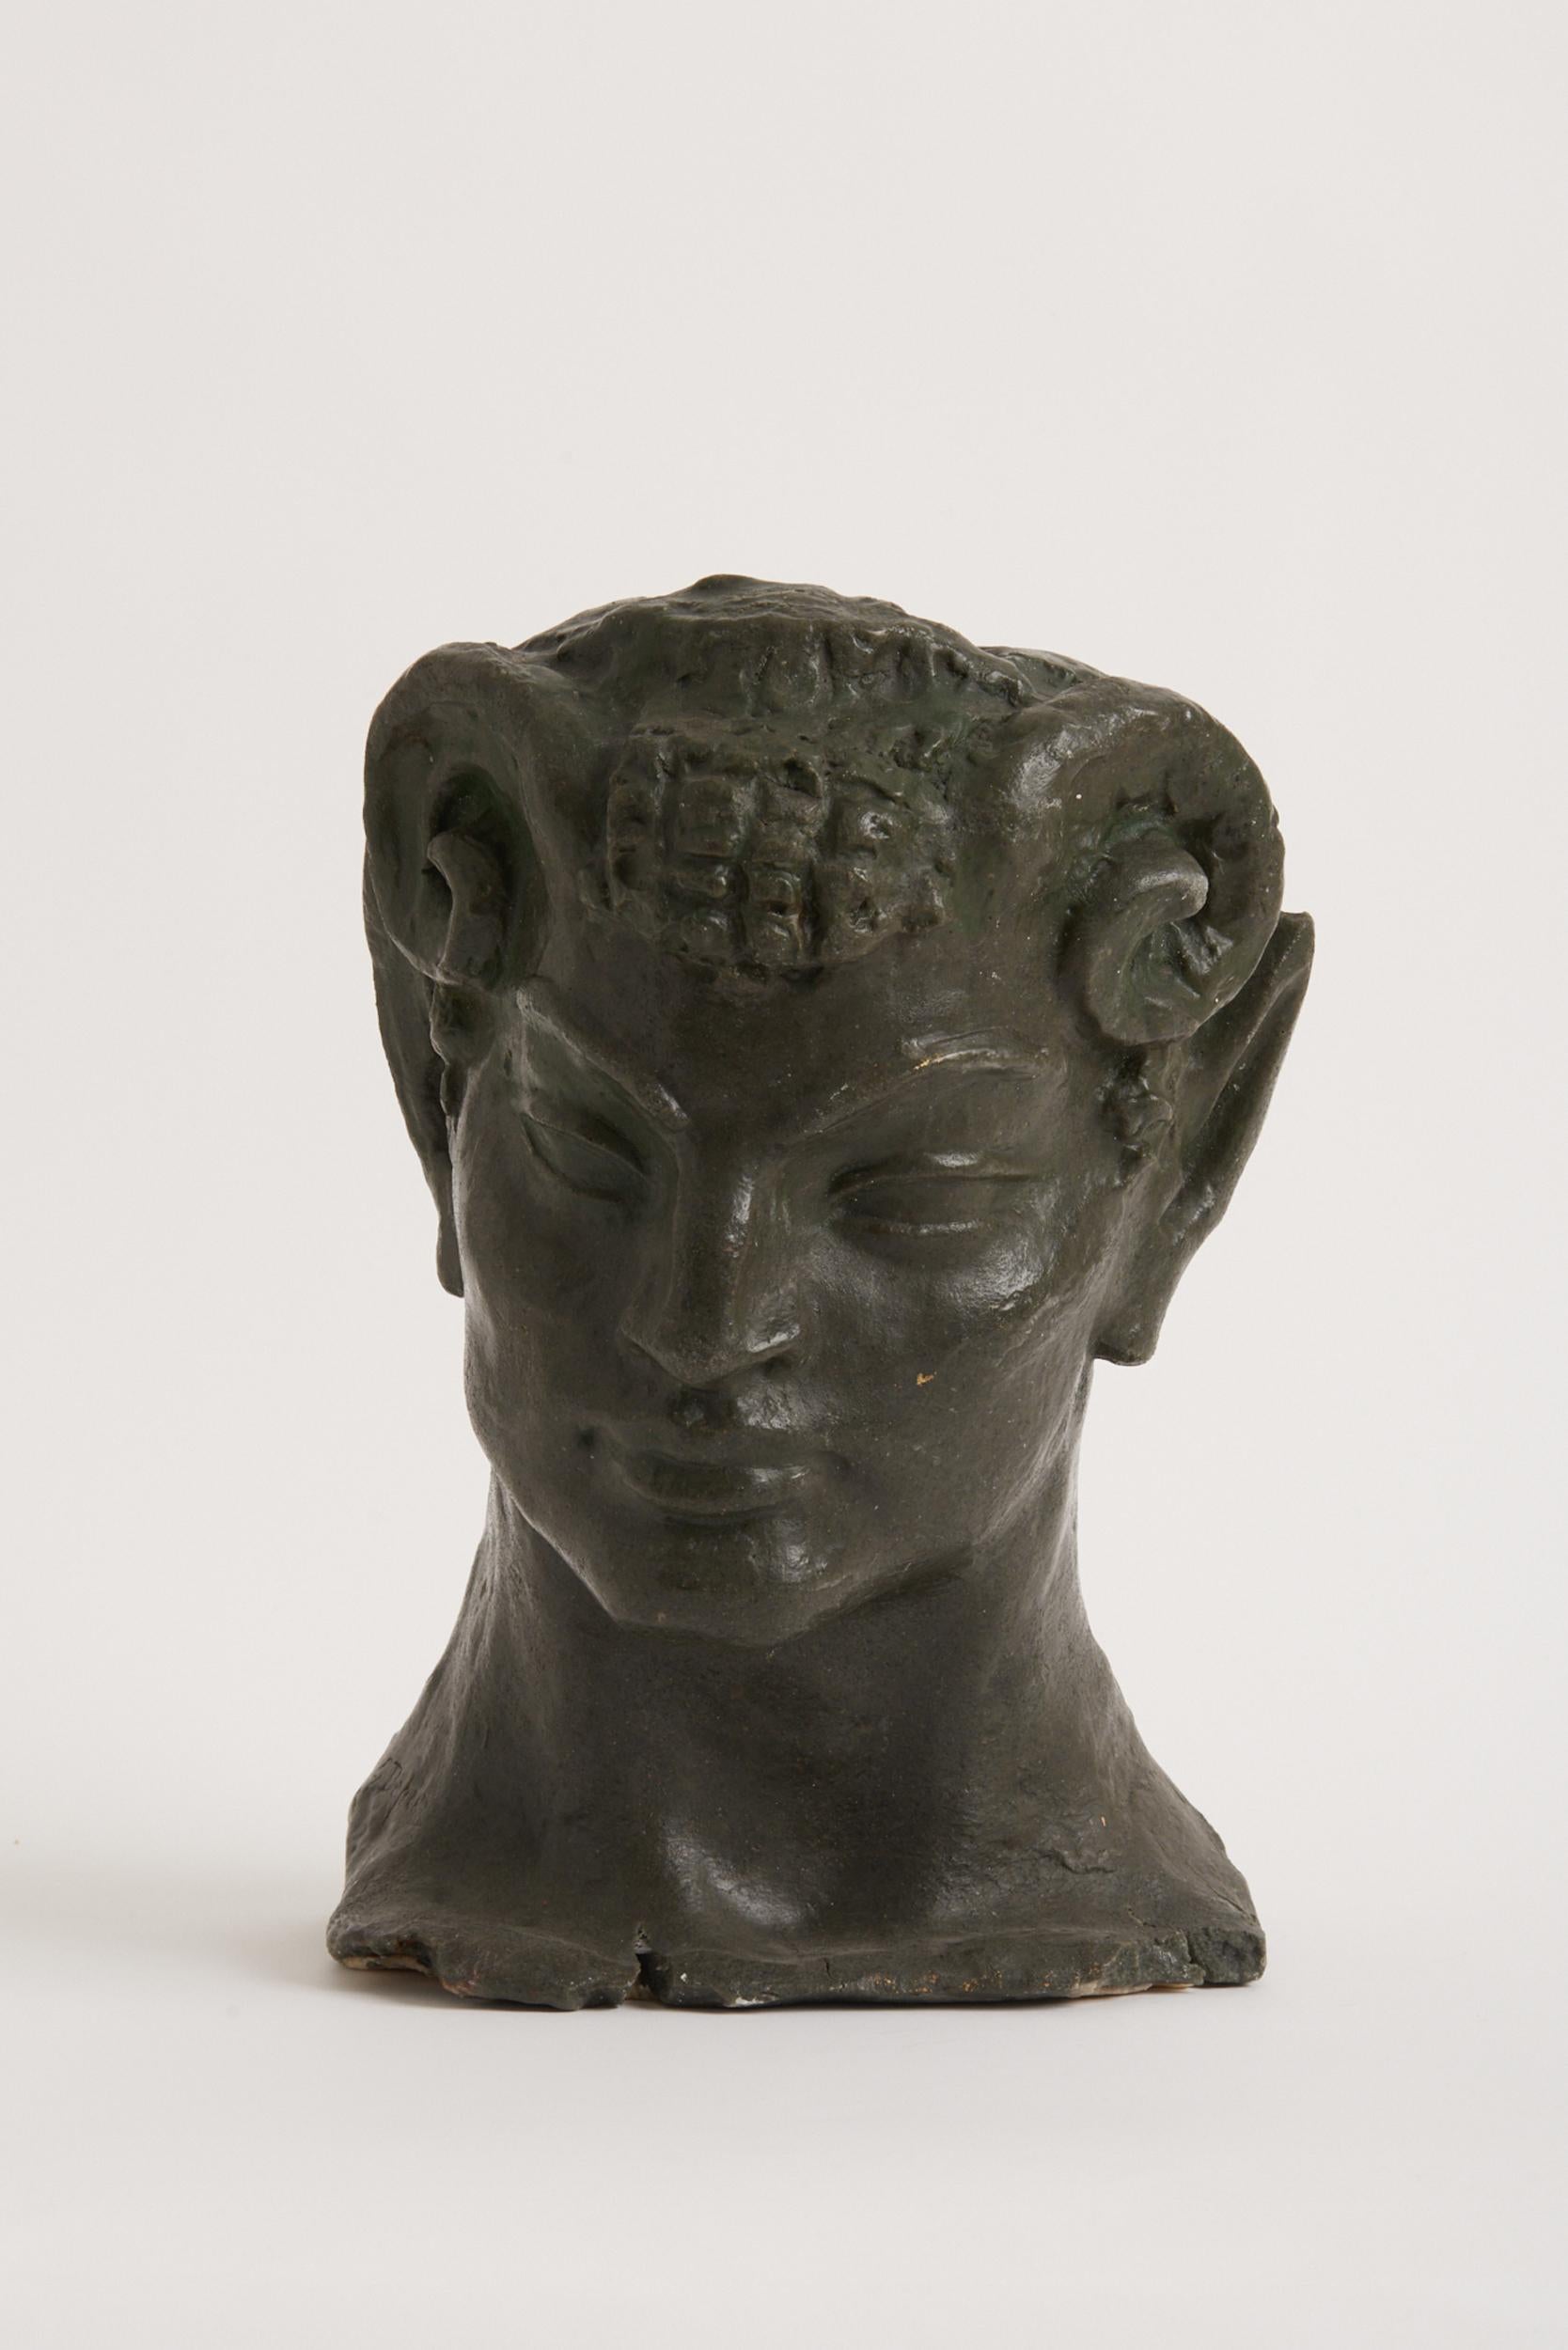 A carved wax sculpture of a faun's head.
France, early 20th Century.